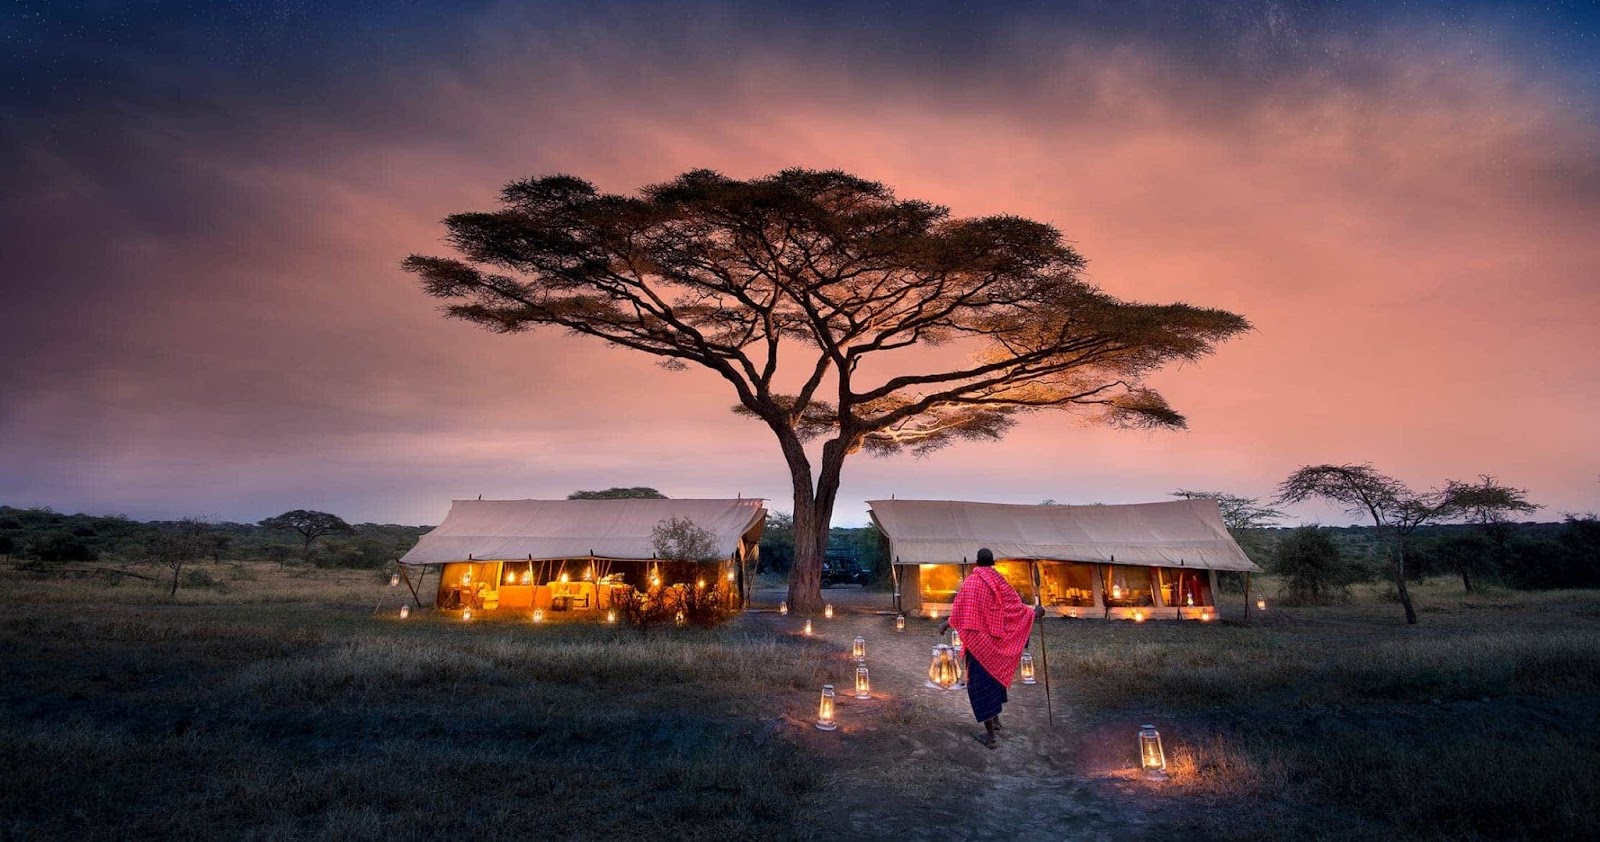 Tanzania's Serengeti park becomes Africas Leading National park by World Travel Awards